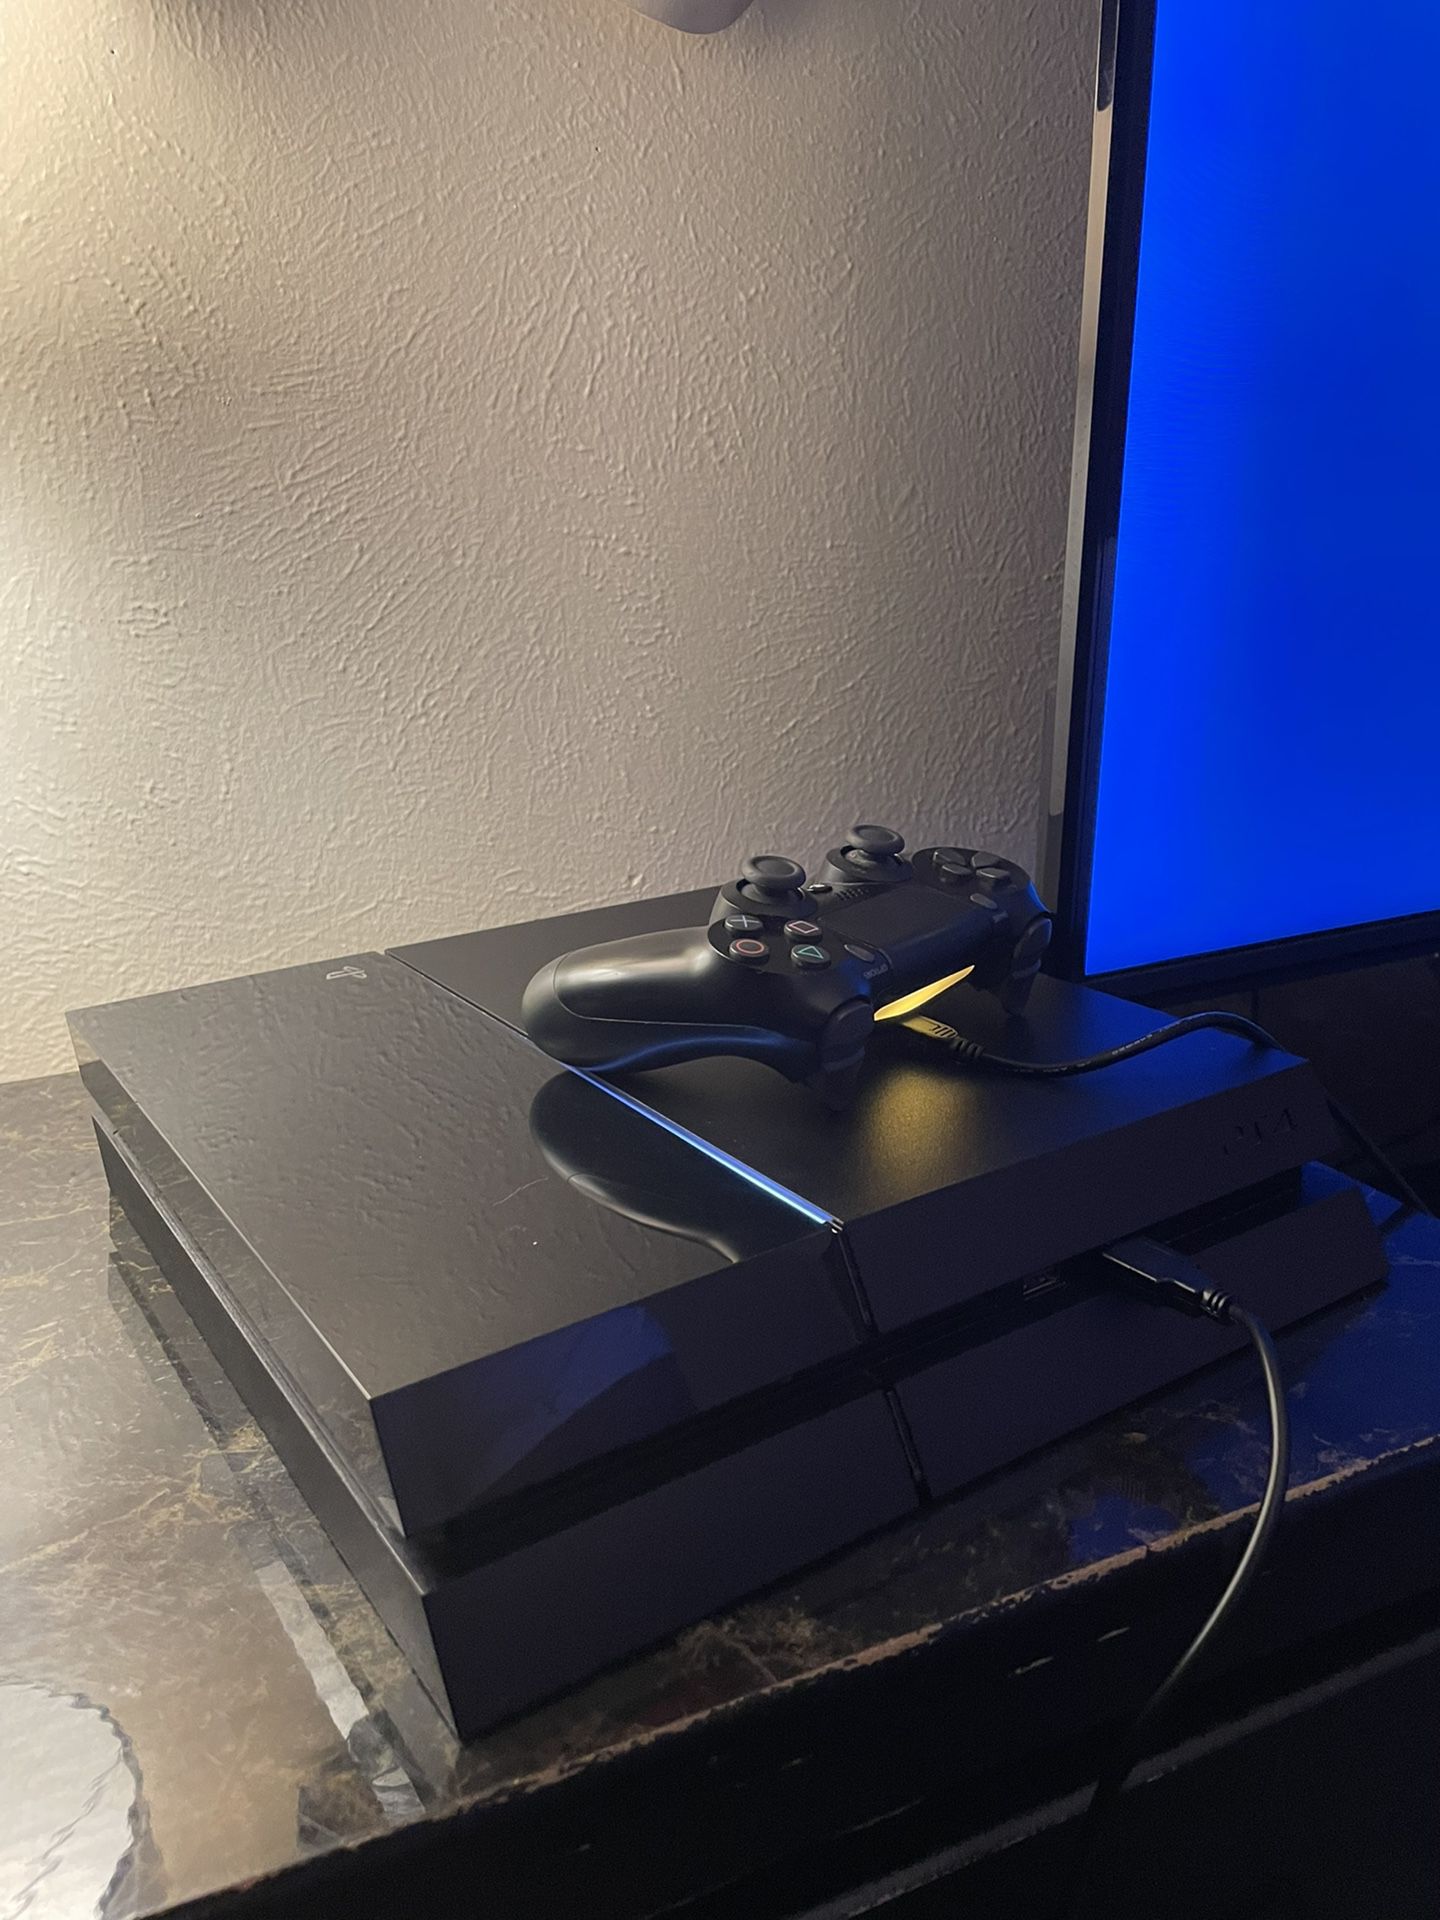 Ps4 For Sale in Aurora, CO -